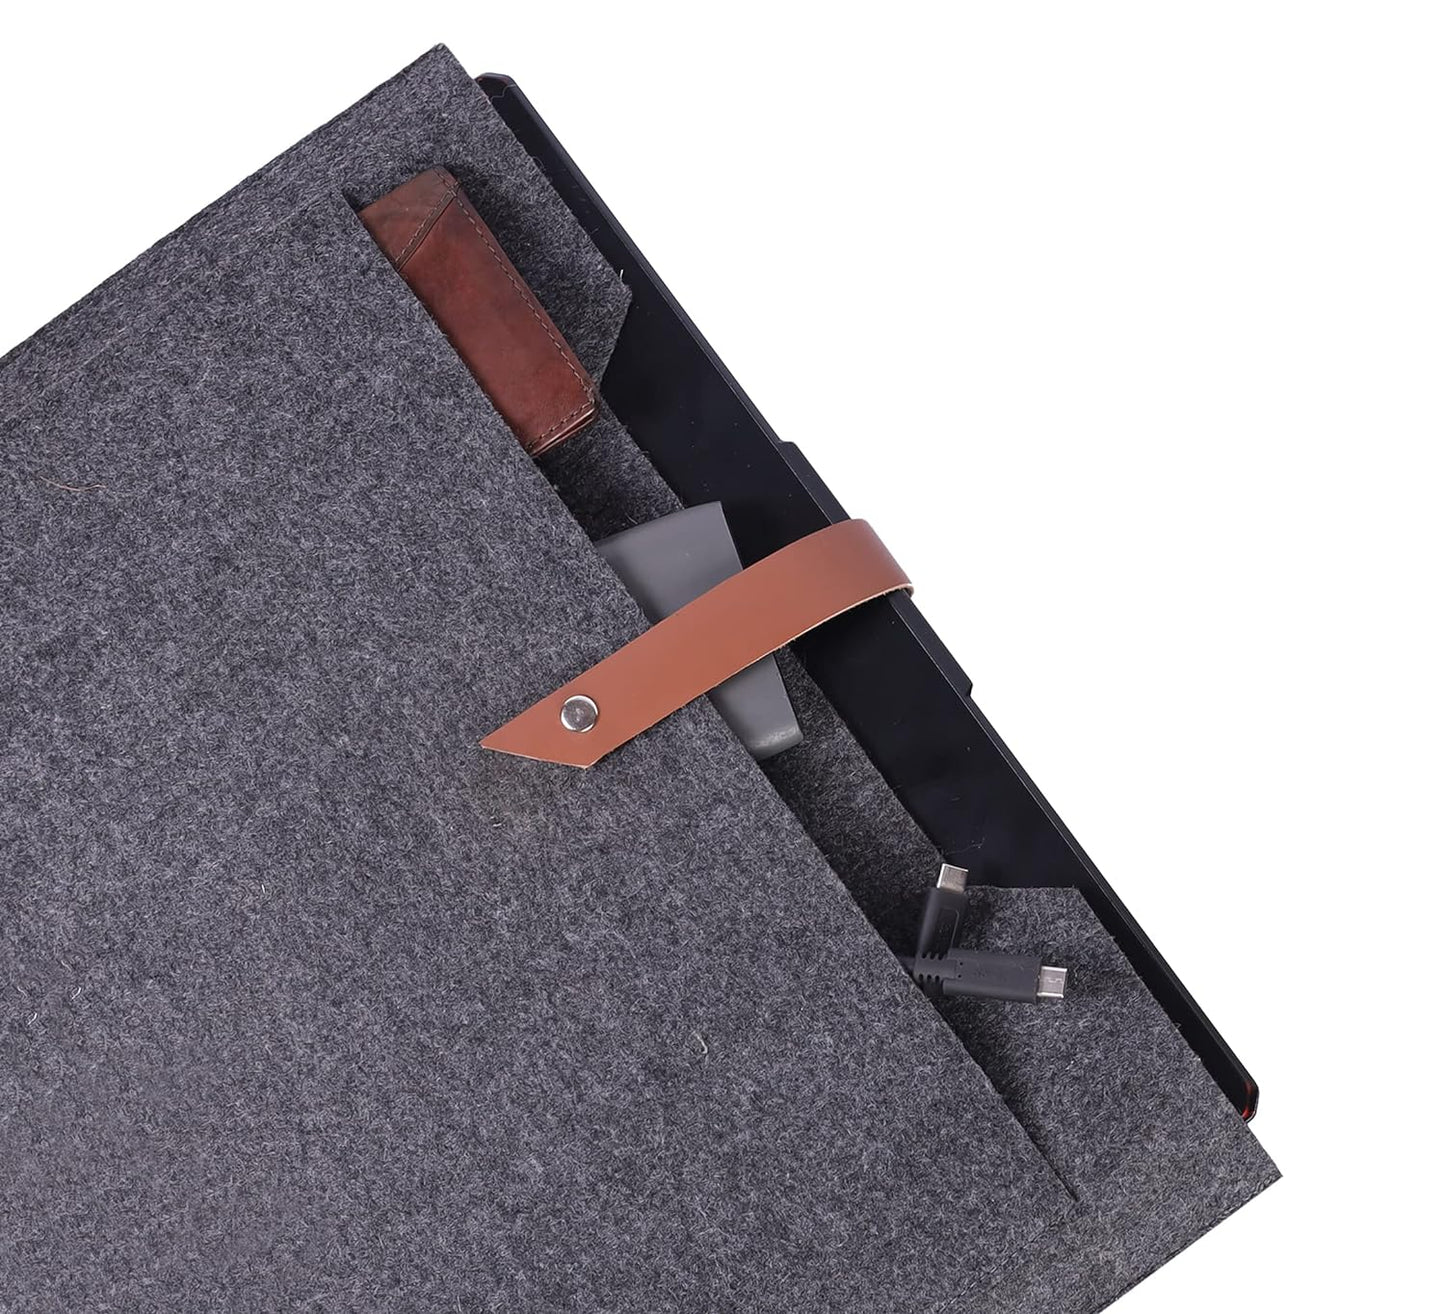 TIERNO Felt Laptop Sleeve Case - Slim and Stylish MacBook Sleeve for - Protective, Dustproof, and Scratch-Resistant - Lightweight Design - Made in India